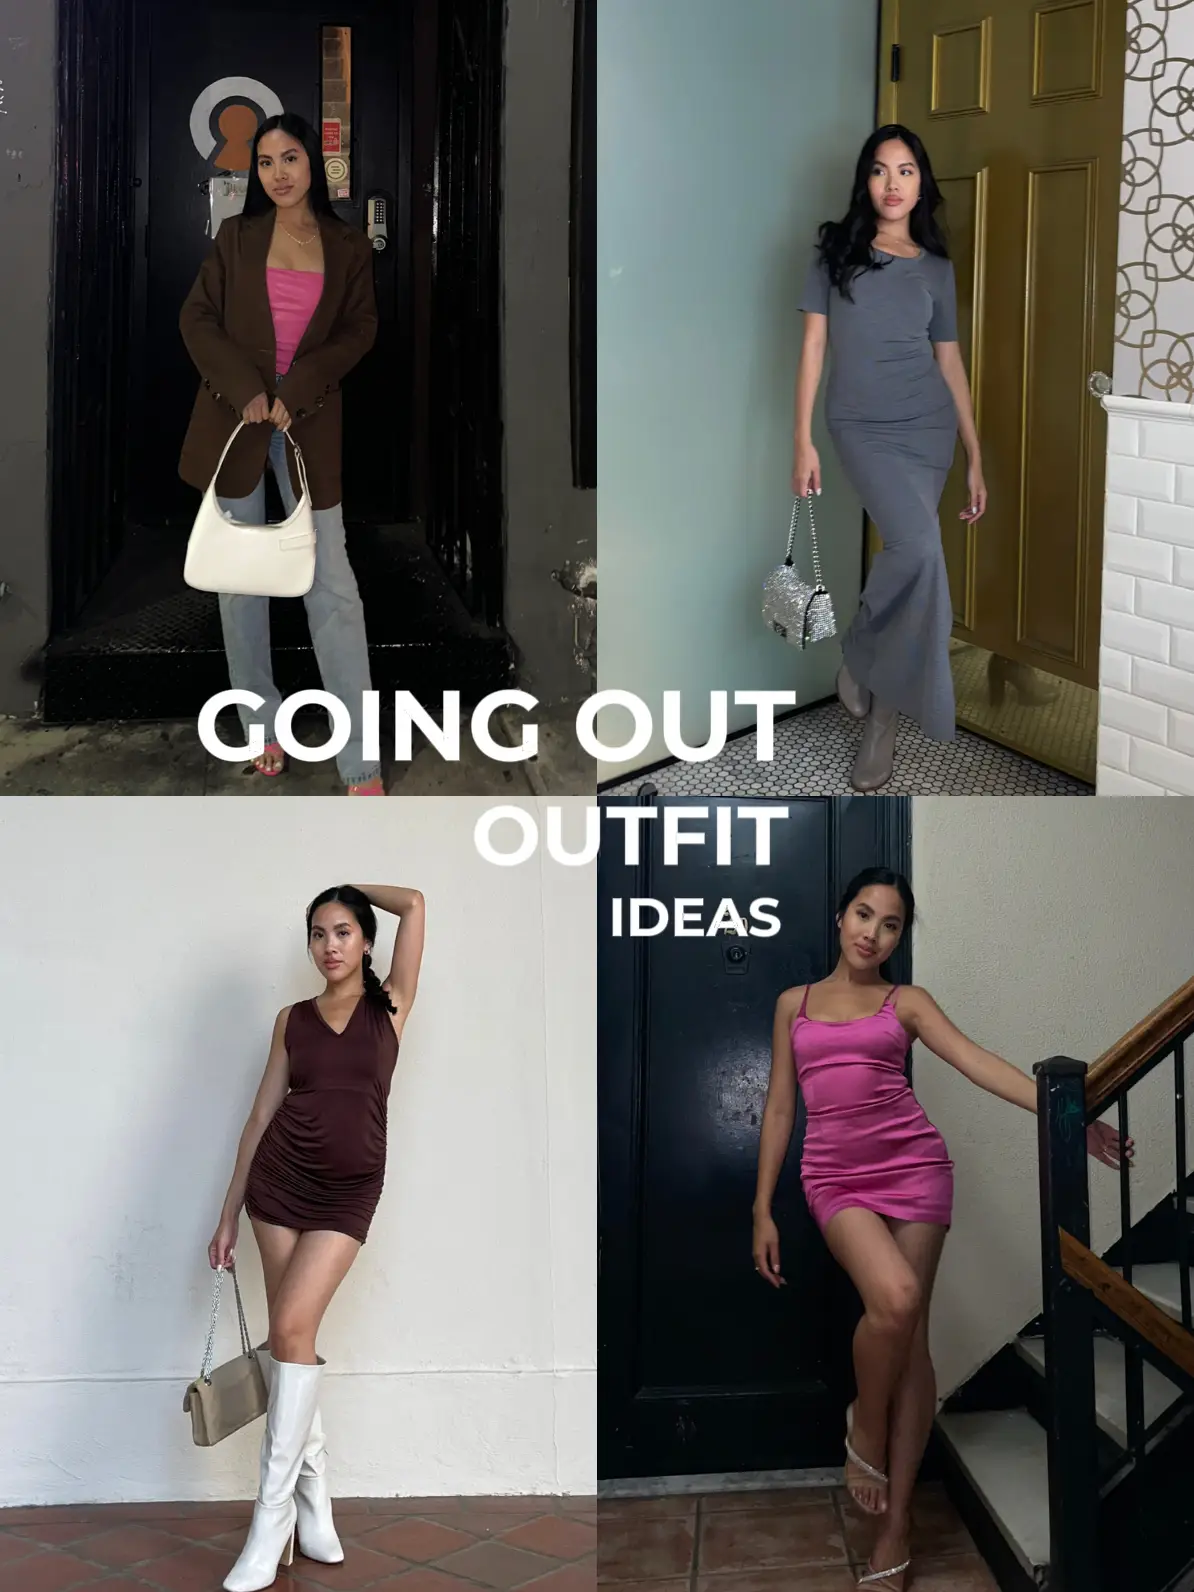 OUTFIT INSPO - GIRLS NIGHT  Gallery posted by loulouduvillier